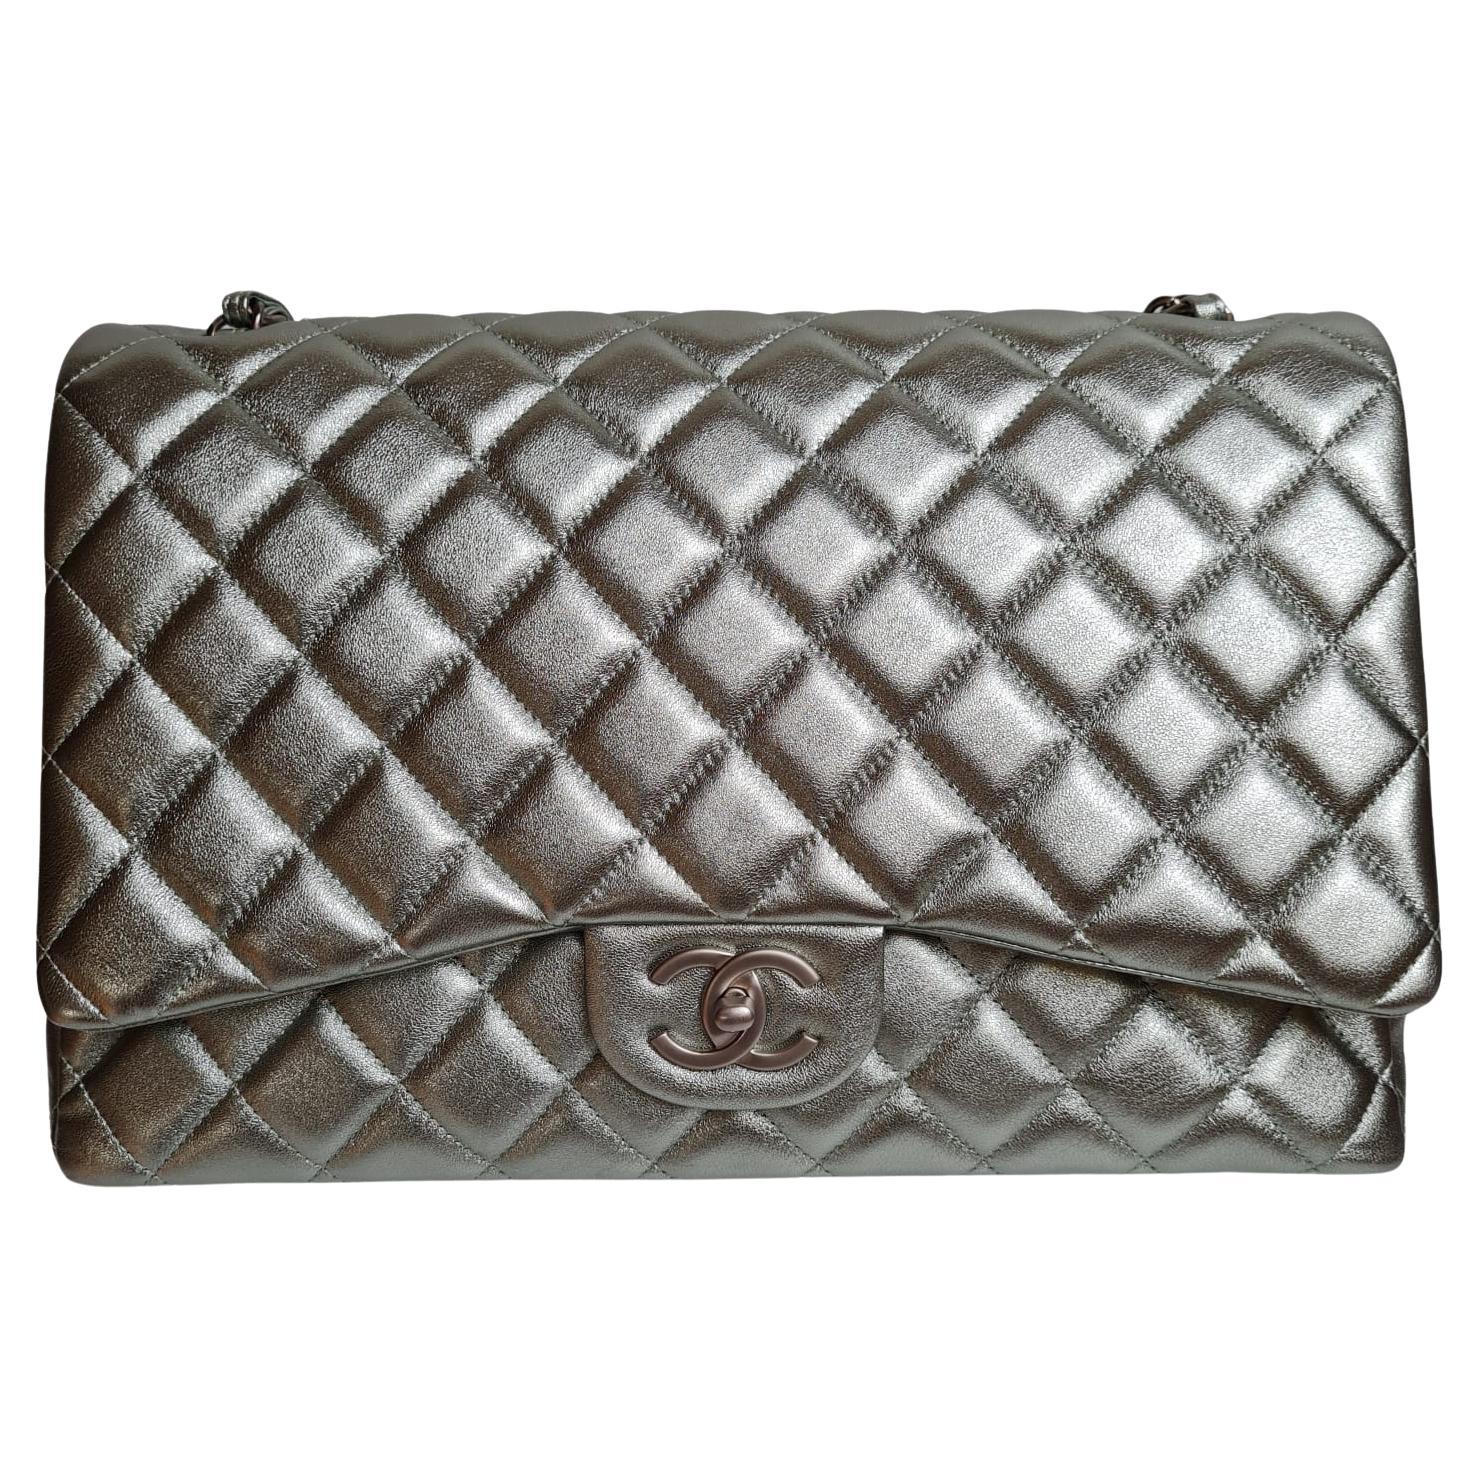 Chanel Silver Metallic Lambskin Quilted Maxi Double Flap Bag at